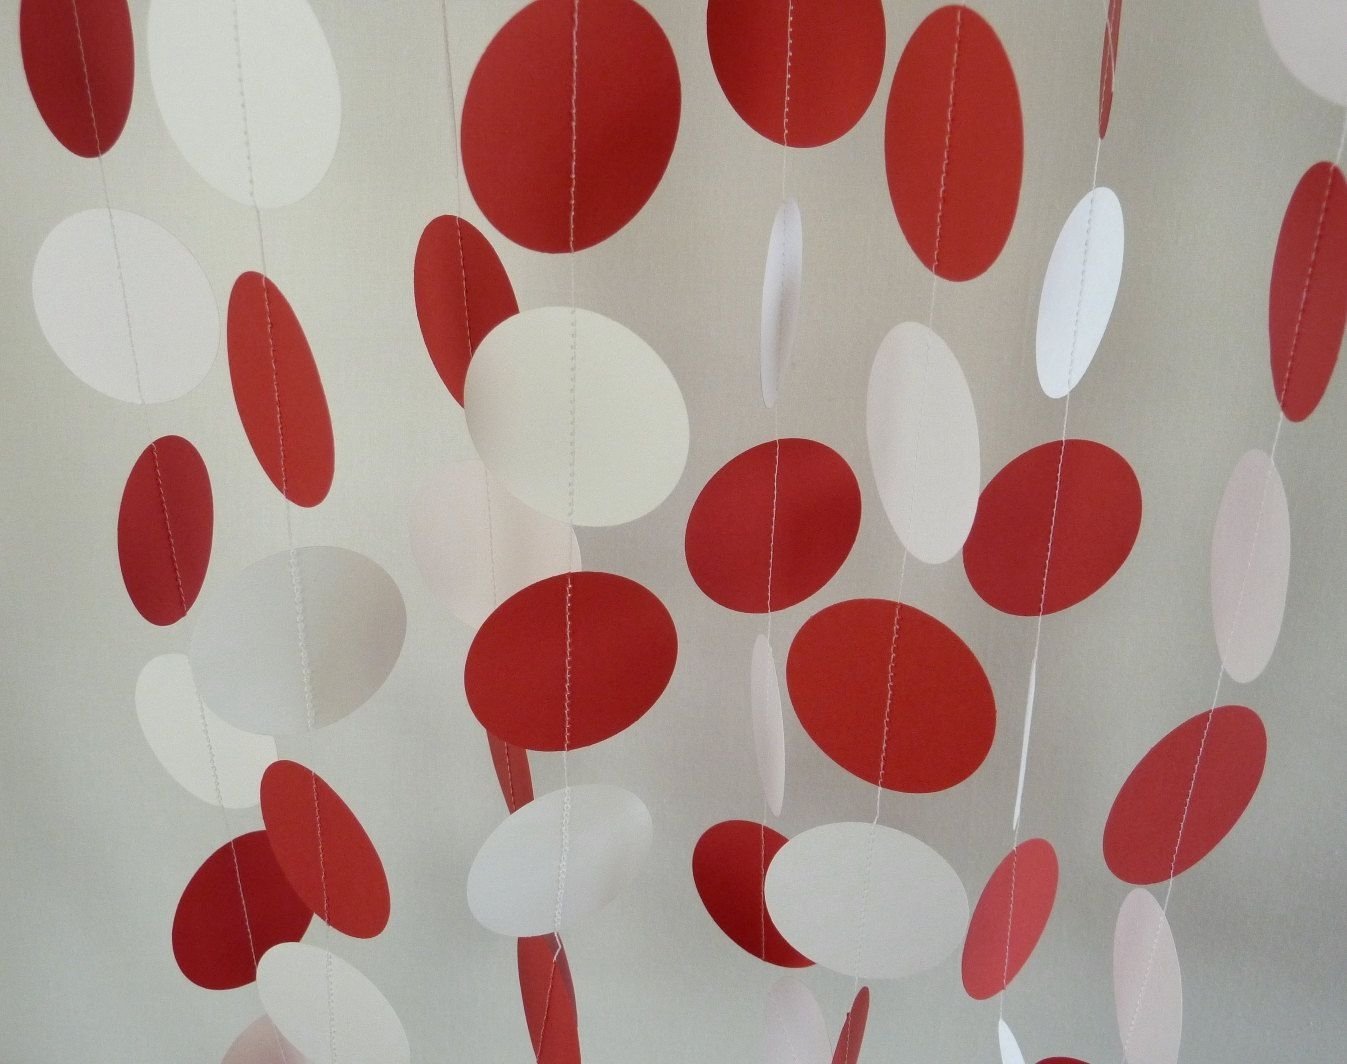 10 Spectacular Red And White Party Ideas red and white paper garland graduation decorations birthday party 2022